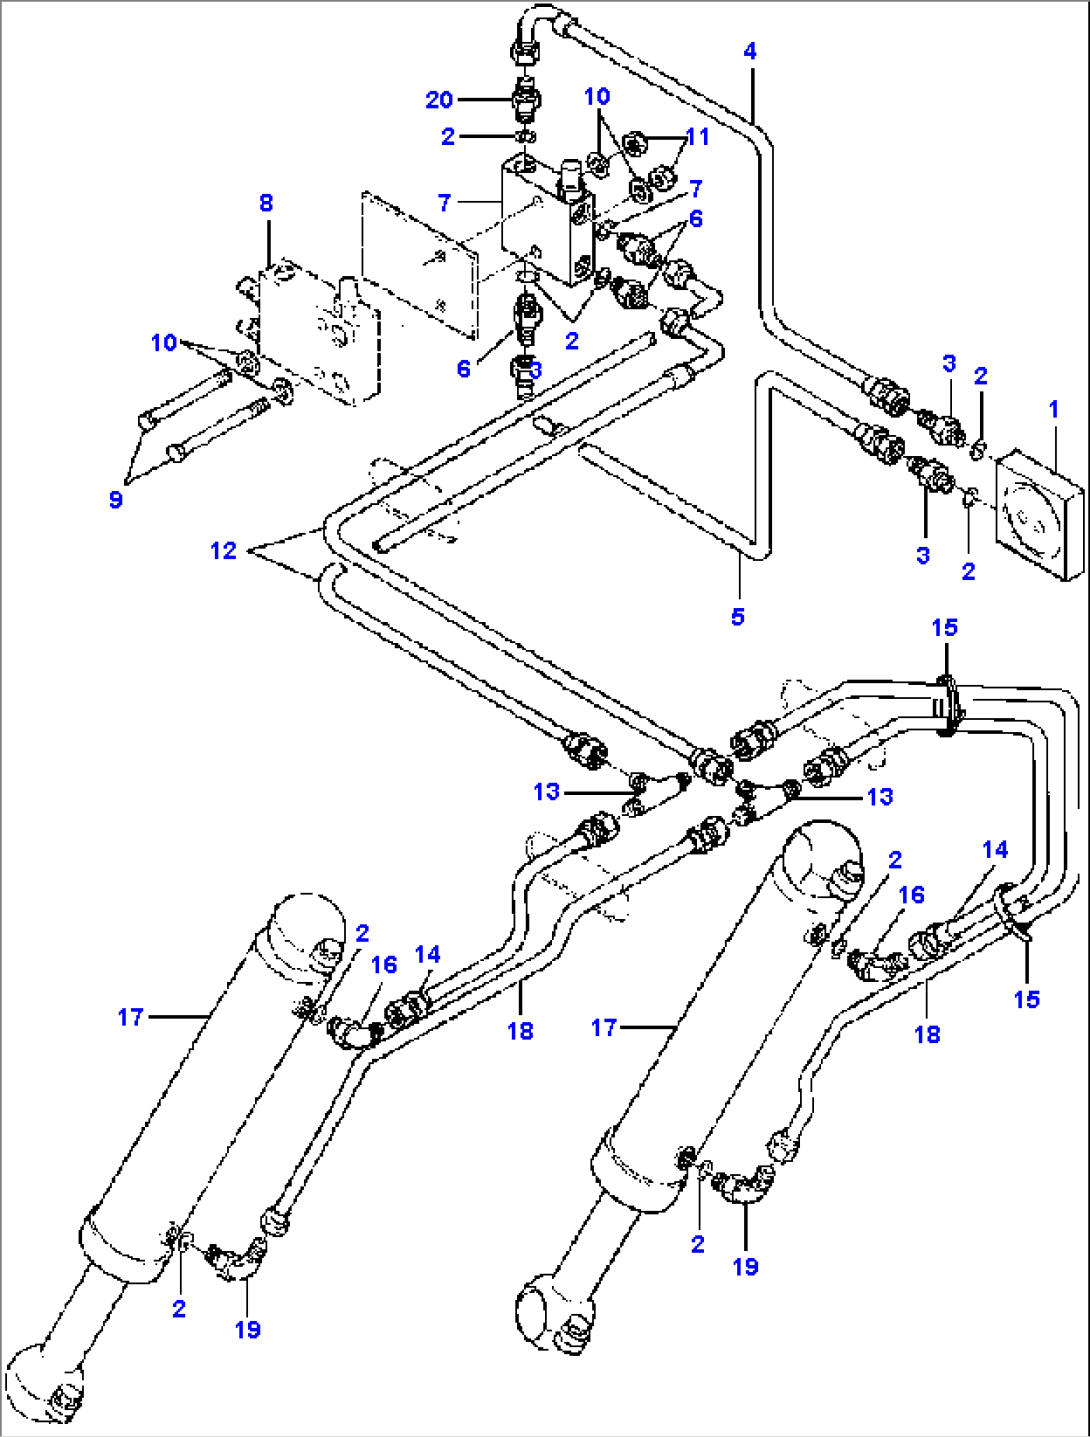 FIG. H5110-02A19 SCARIFIER CYLINDER ACTUATOR LINES